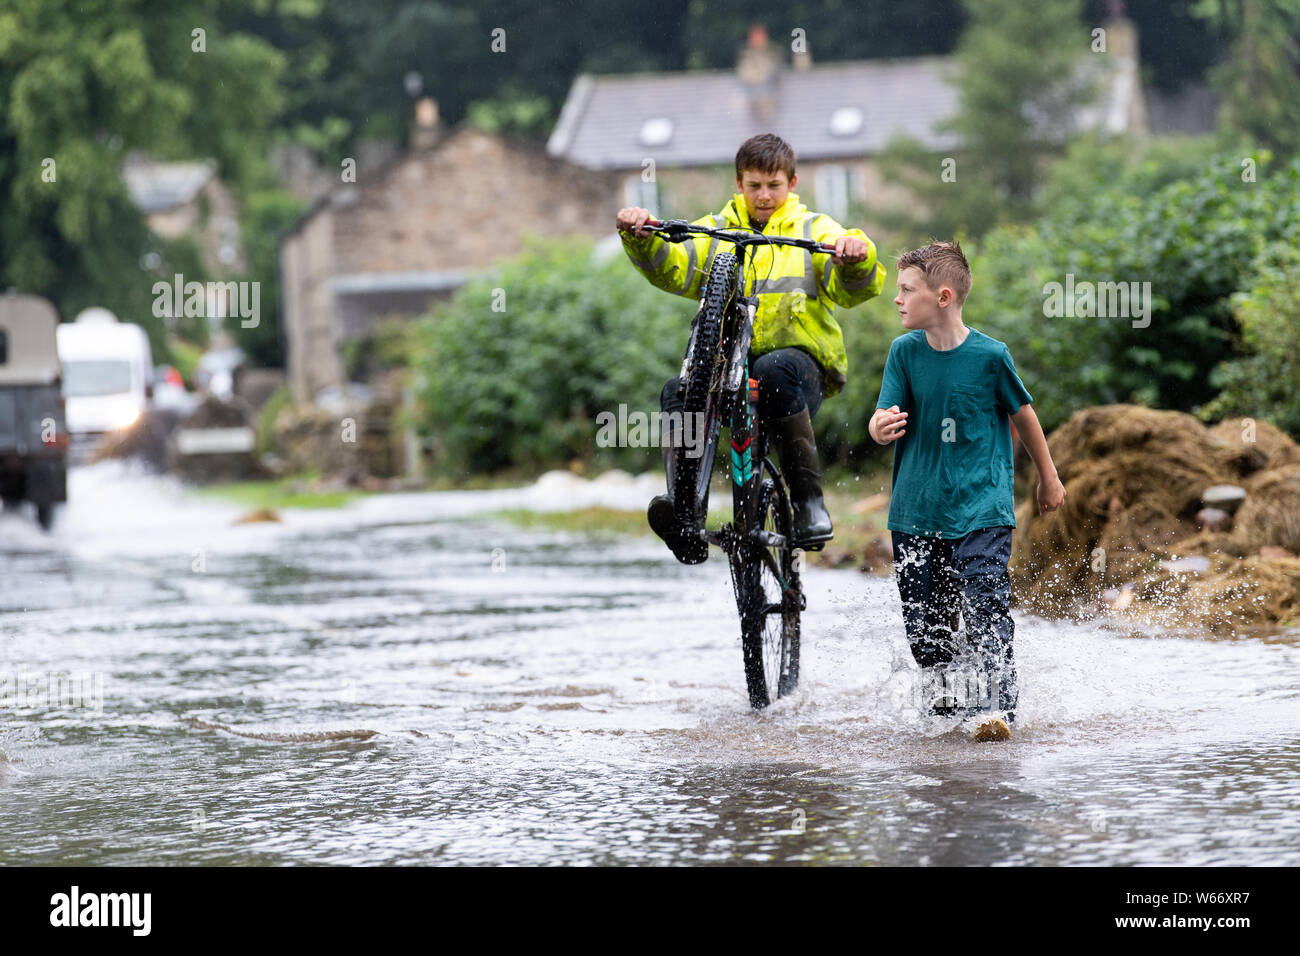 Swaledale, Yorkshire, UK. 31st Jul, 2019. Flash flood in Reeth and Fremington, Swaledale in the Yorkshire Dales National Park caused serious devestation and a full months worth of rain fell in less than 4 hours, sweeping away cars and flooding houses in the area. Credit: Wayne HUTCHINSON/Alamy Live News Stock Photo